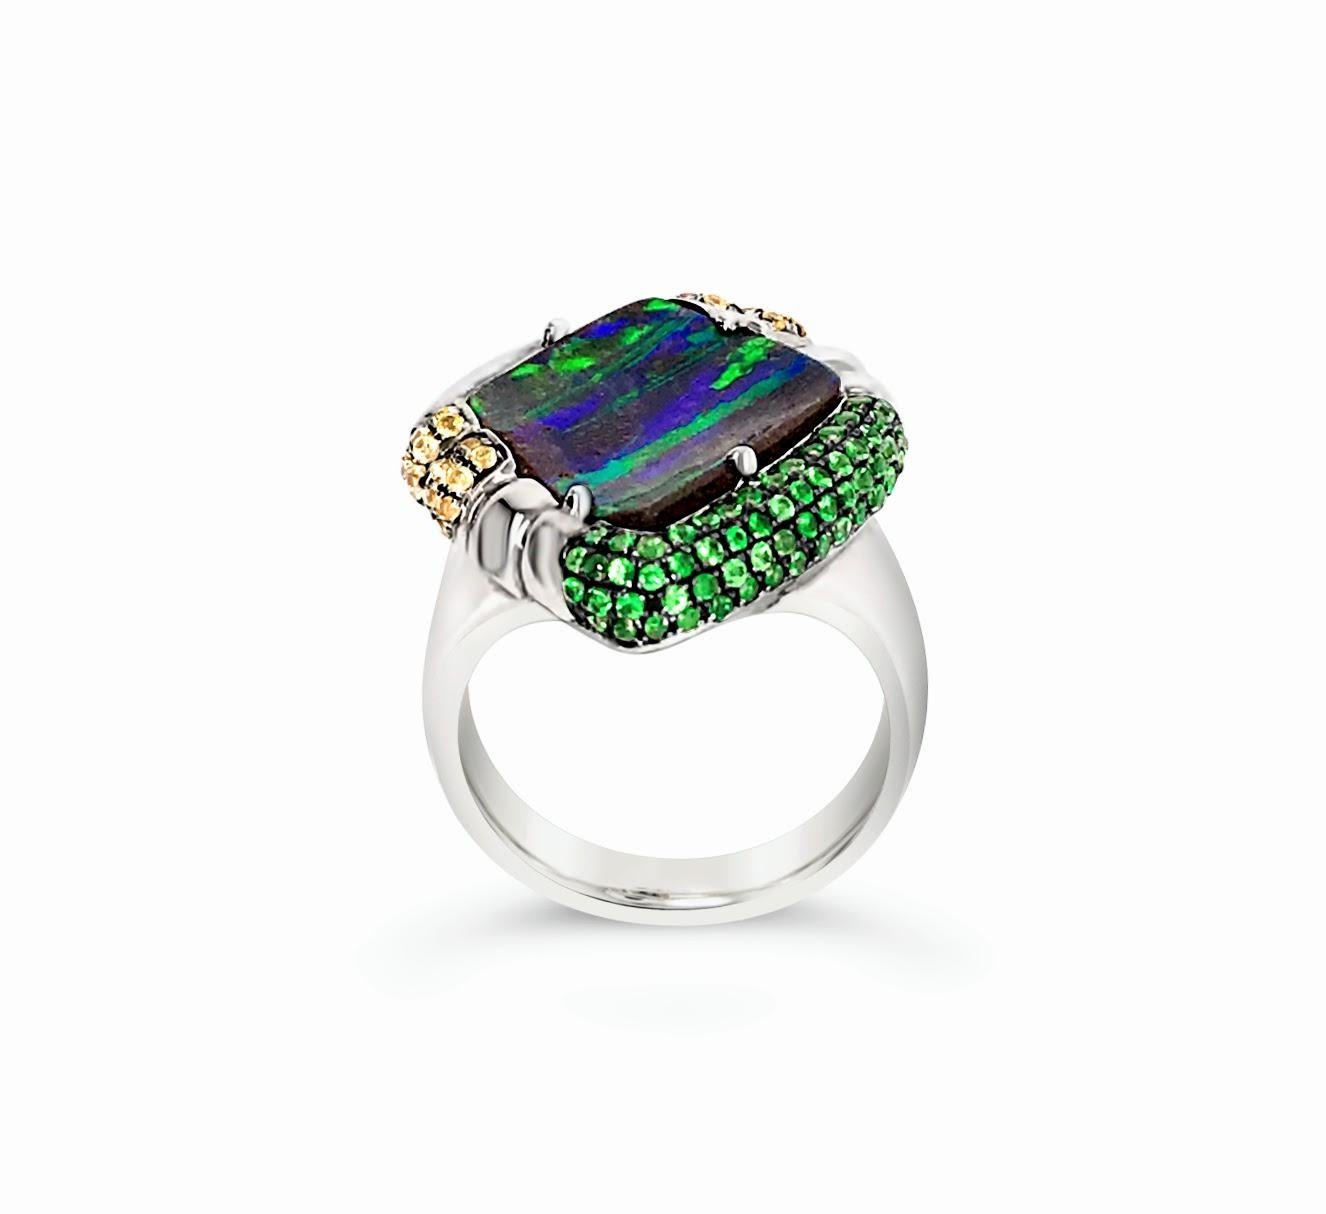 Contemporary Australian 13.76ct Boulder Opal, Garnets, Sapphires Cocktail Ring 18K White Gold For Sale